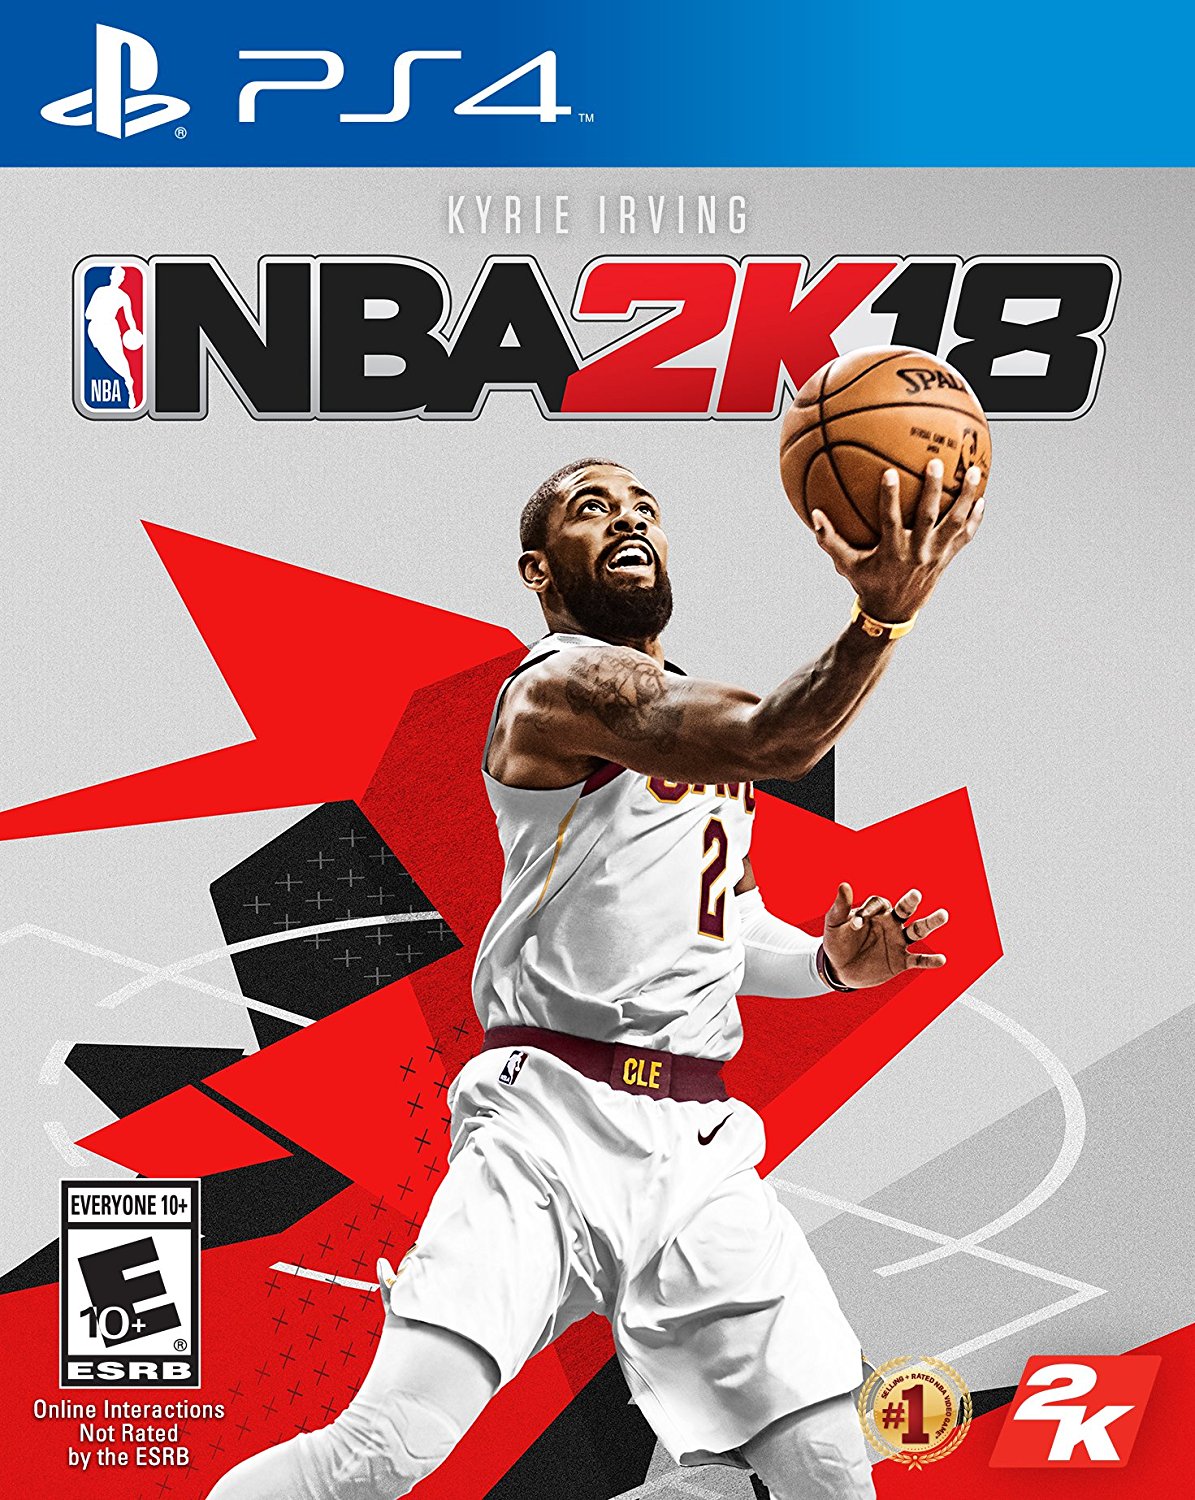 NBA 2K18 [PS4/XBOX One] ($29.99/50%) - Best Buy Black Friday Deal NBA 2K18's Standard Edition is on sale at Best Buy for $29.99 for both PlayStation 4 and Xbox One this Black Friday! A great time to catch up on NBA 2K! Photo Promo Credit: Amazon via 2K Sports / Visual Concepts